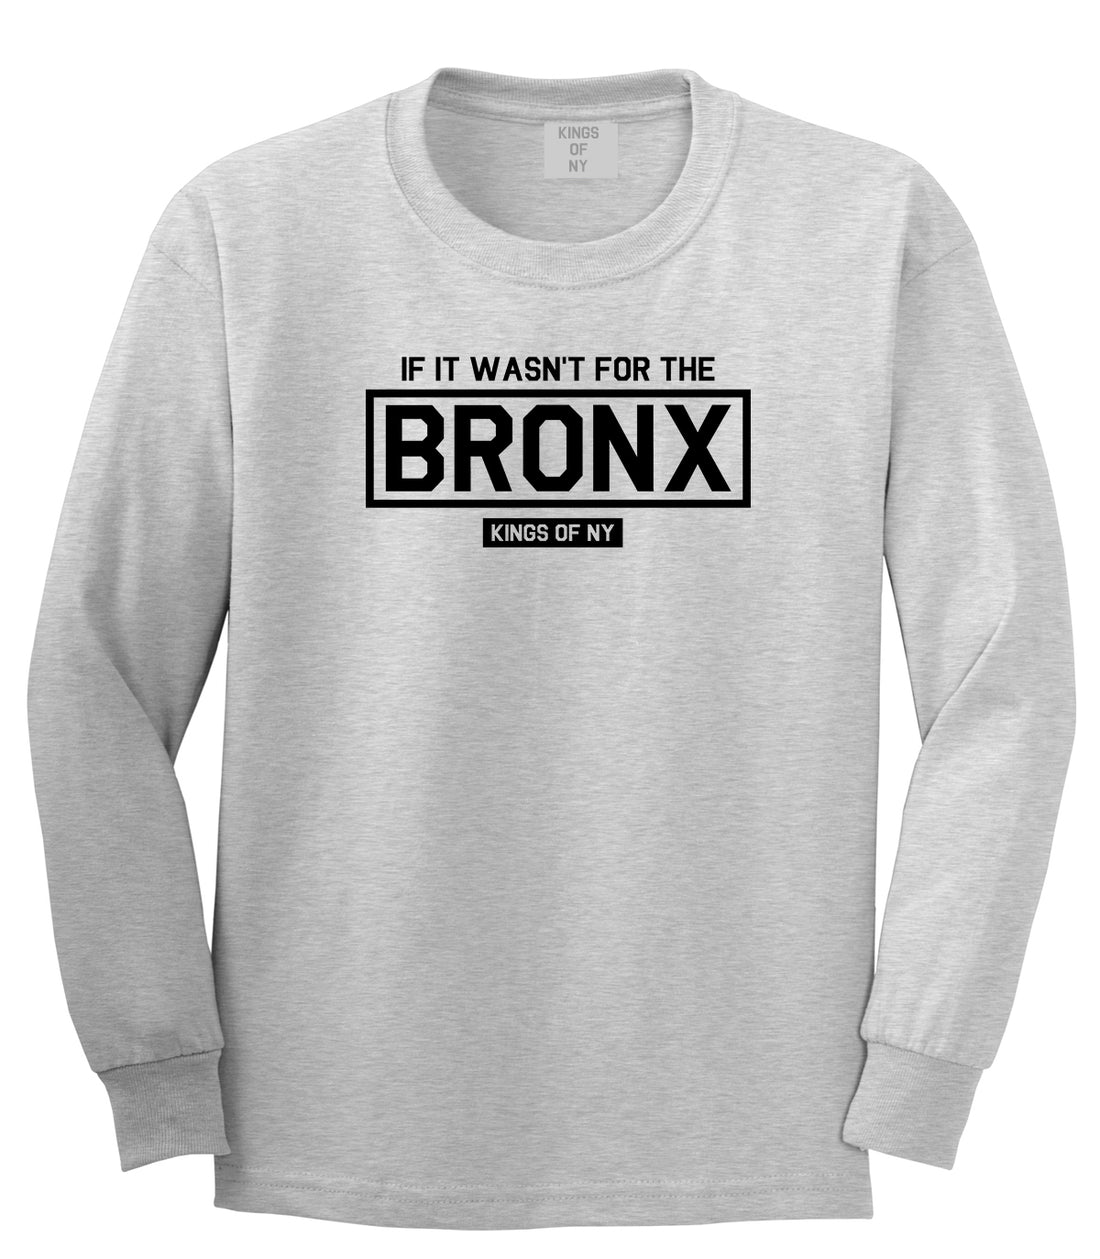 If It Wasnt For The Bronx Mens Long Sleeve T-Shirt Grey by Kings Of NY